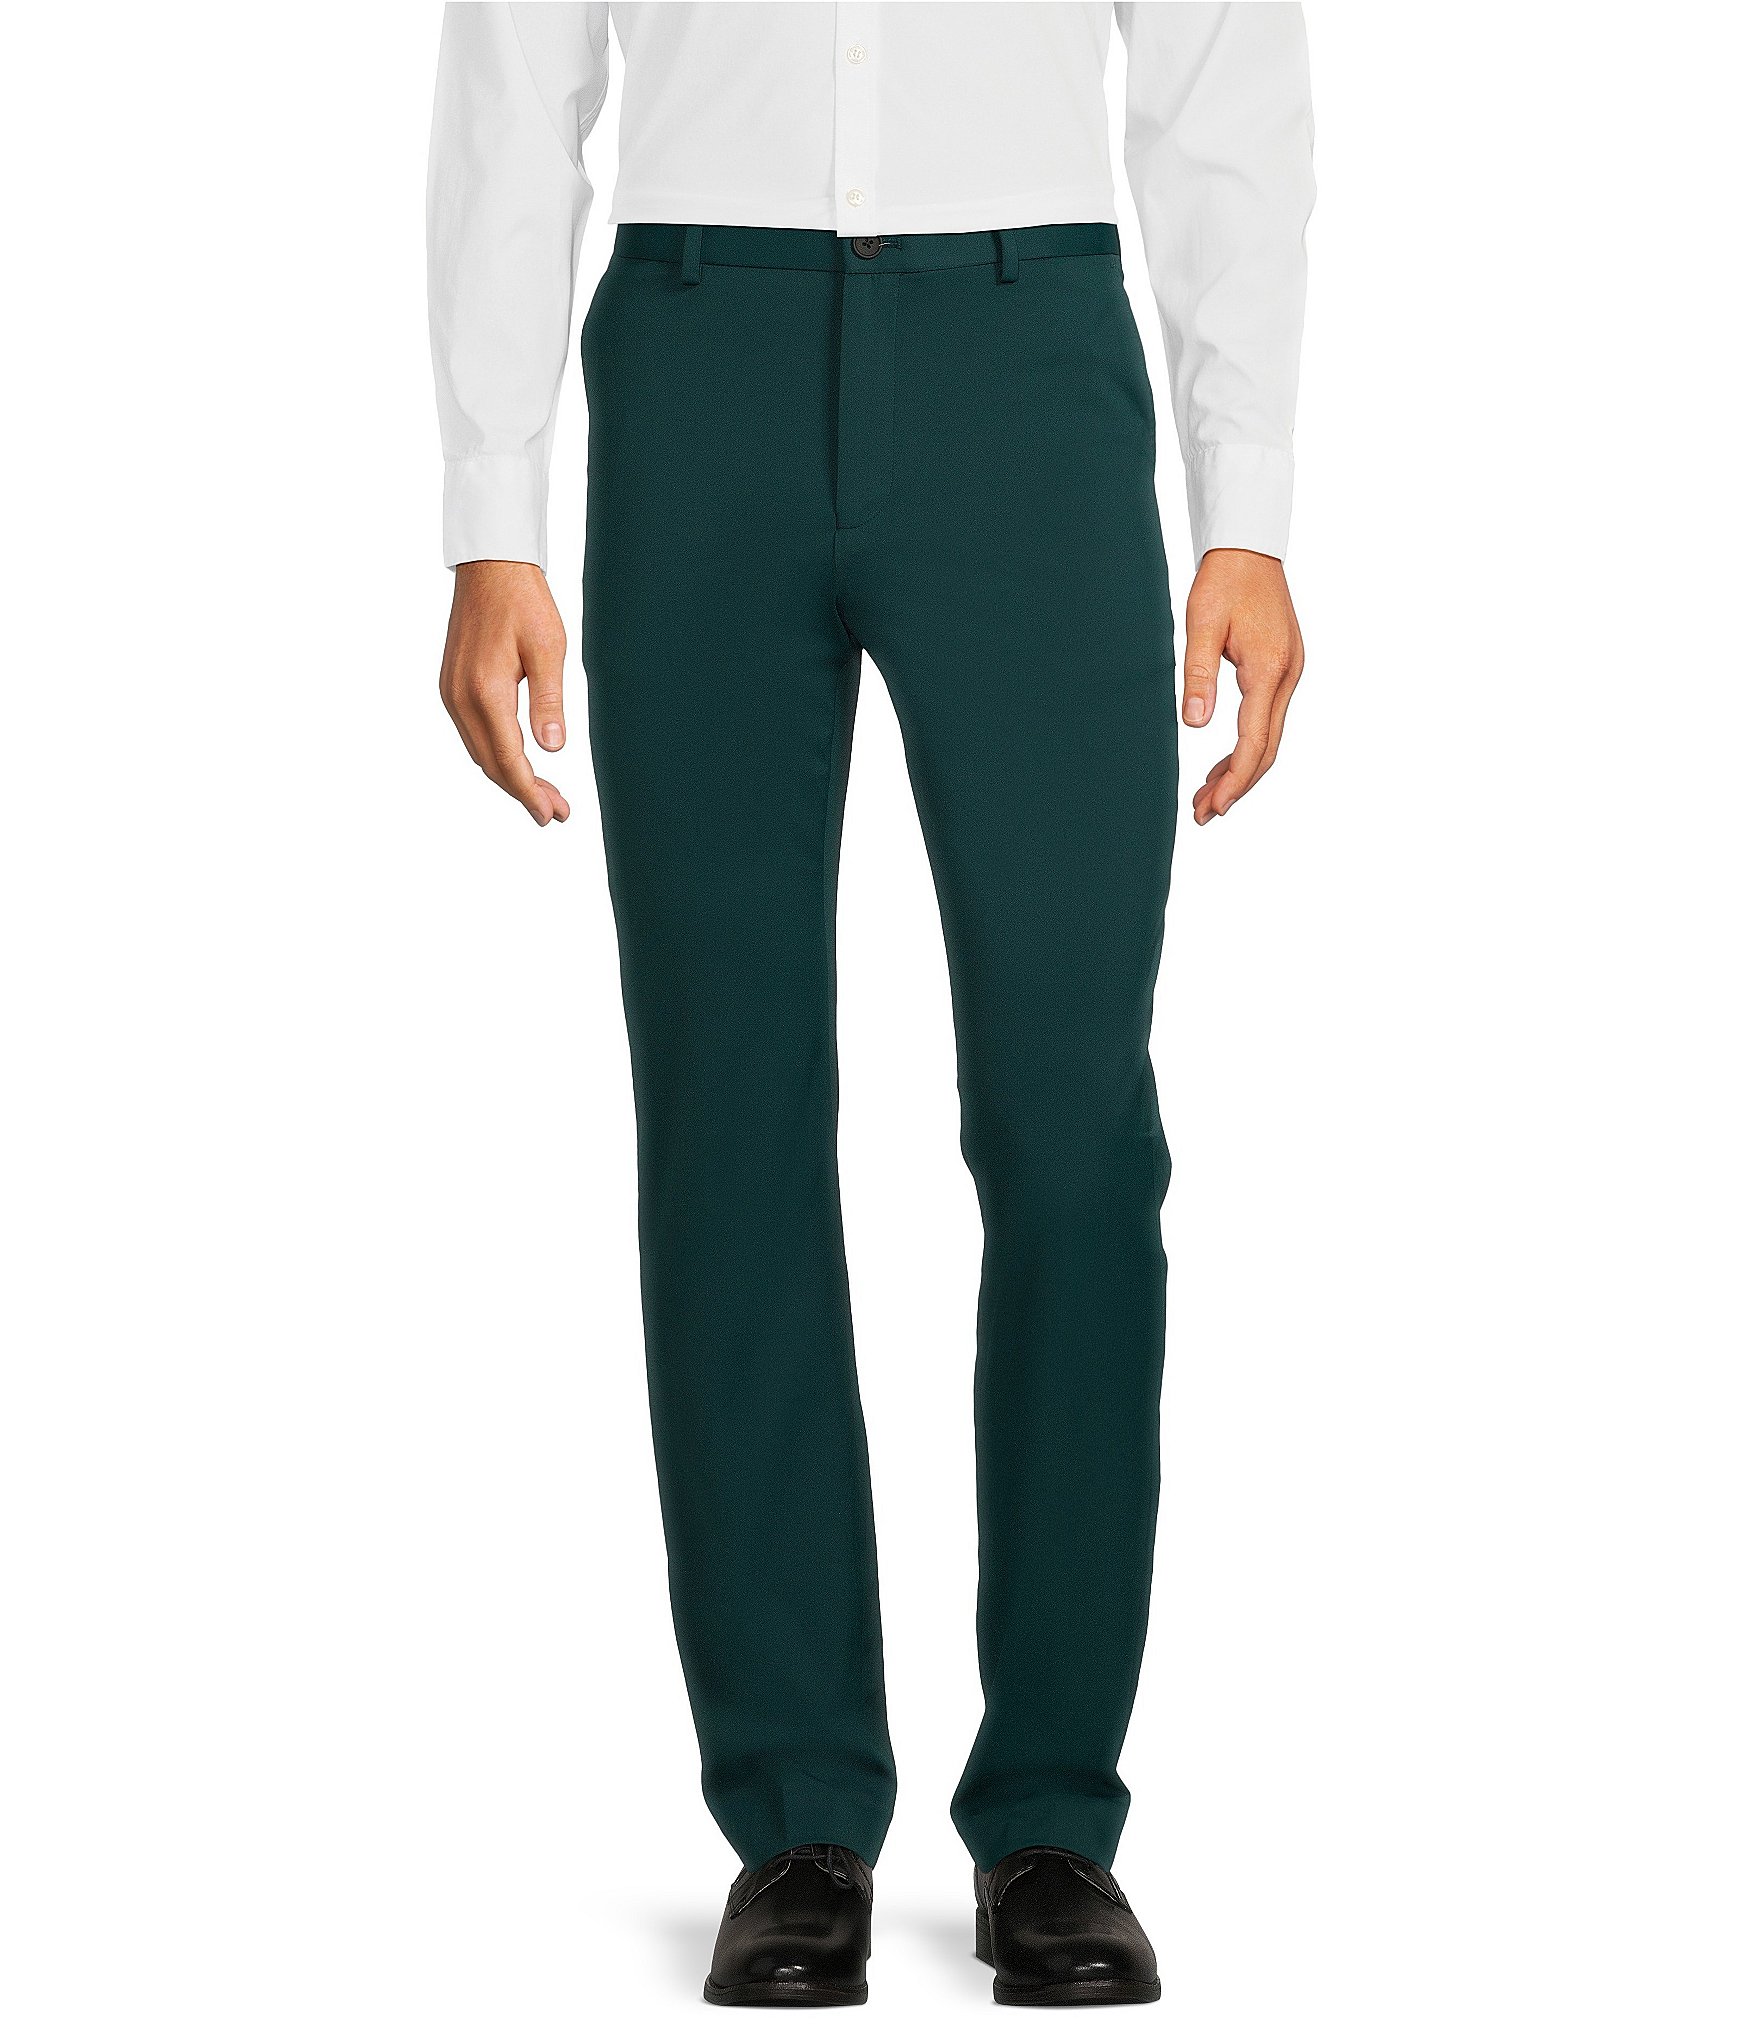 Solid Dark Green Plain Formal Trousers at Rs 1399.00 | Formal Trousers |  ID: 2850482410912